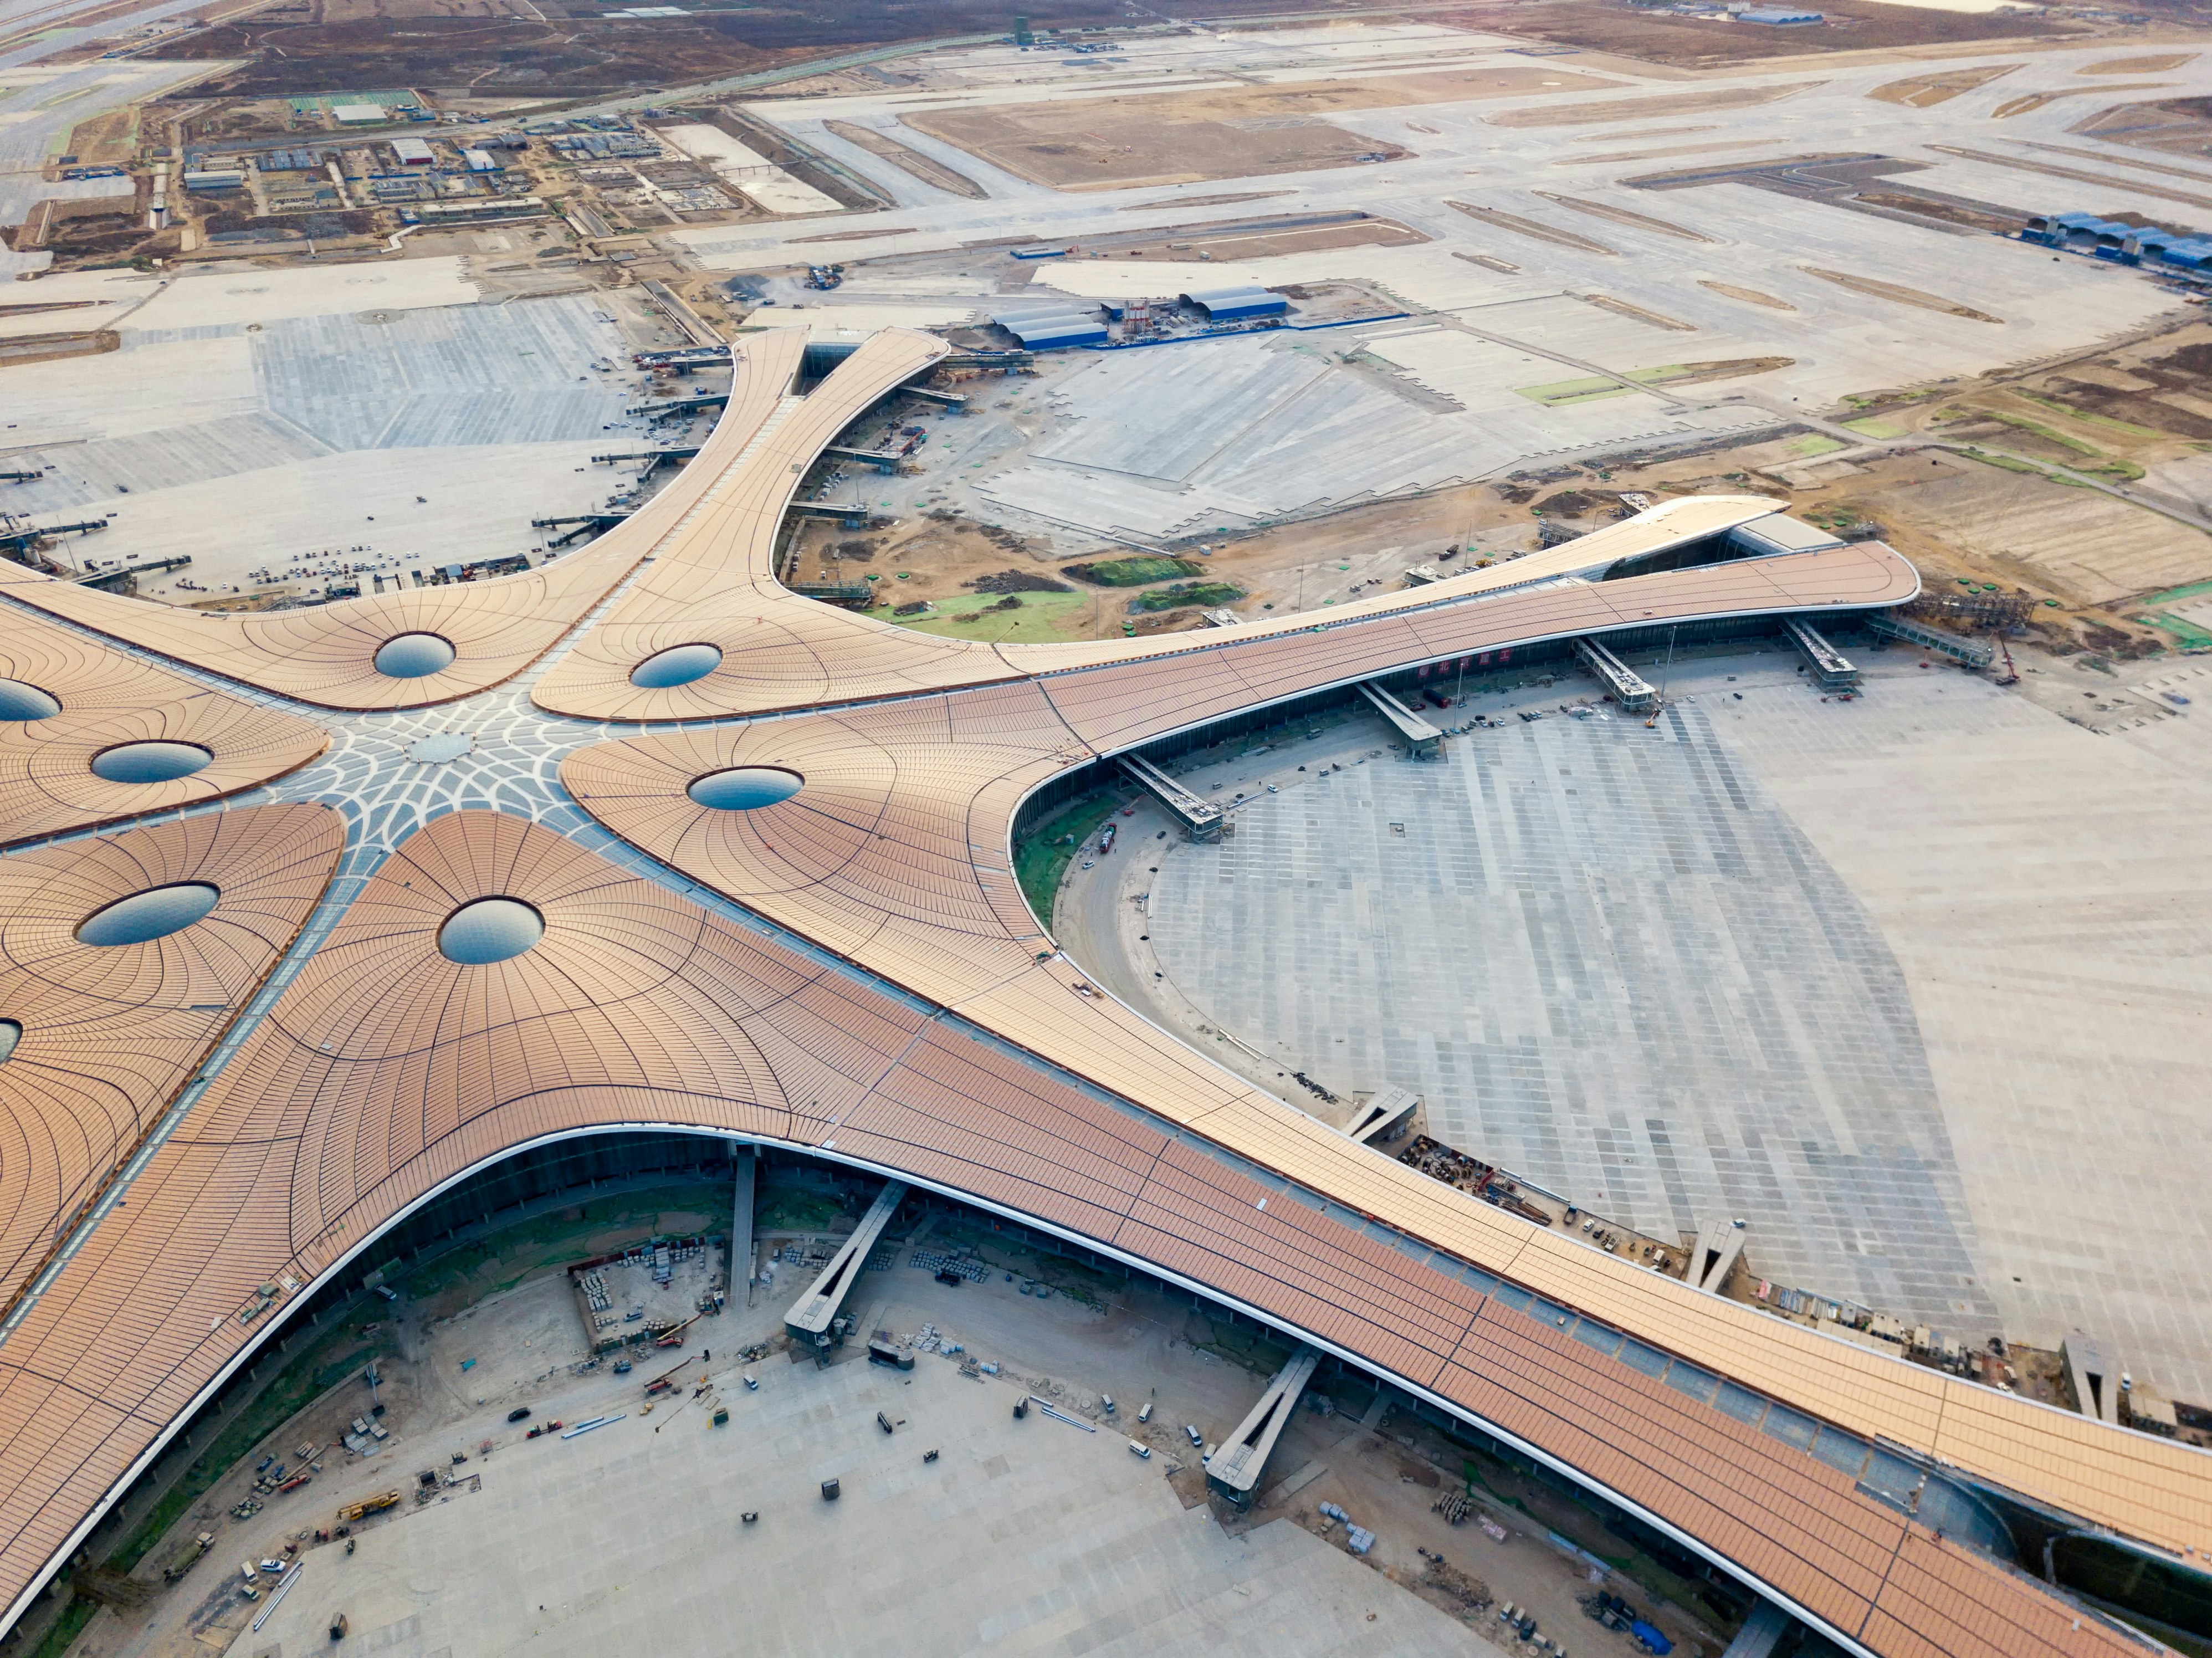 The terminal of Beijing Daxing International Airport is under construction.